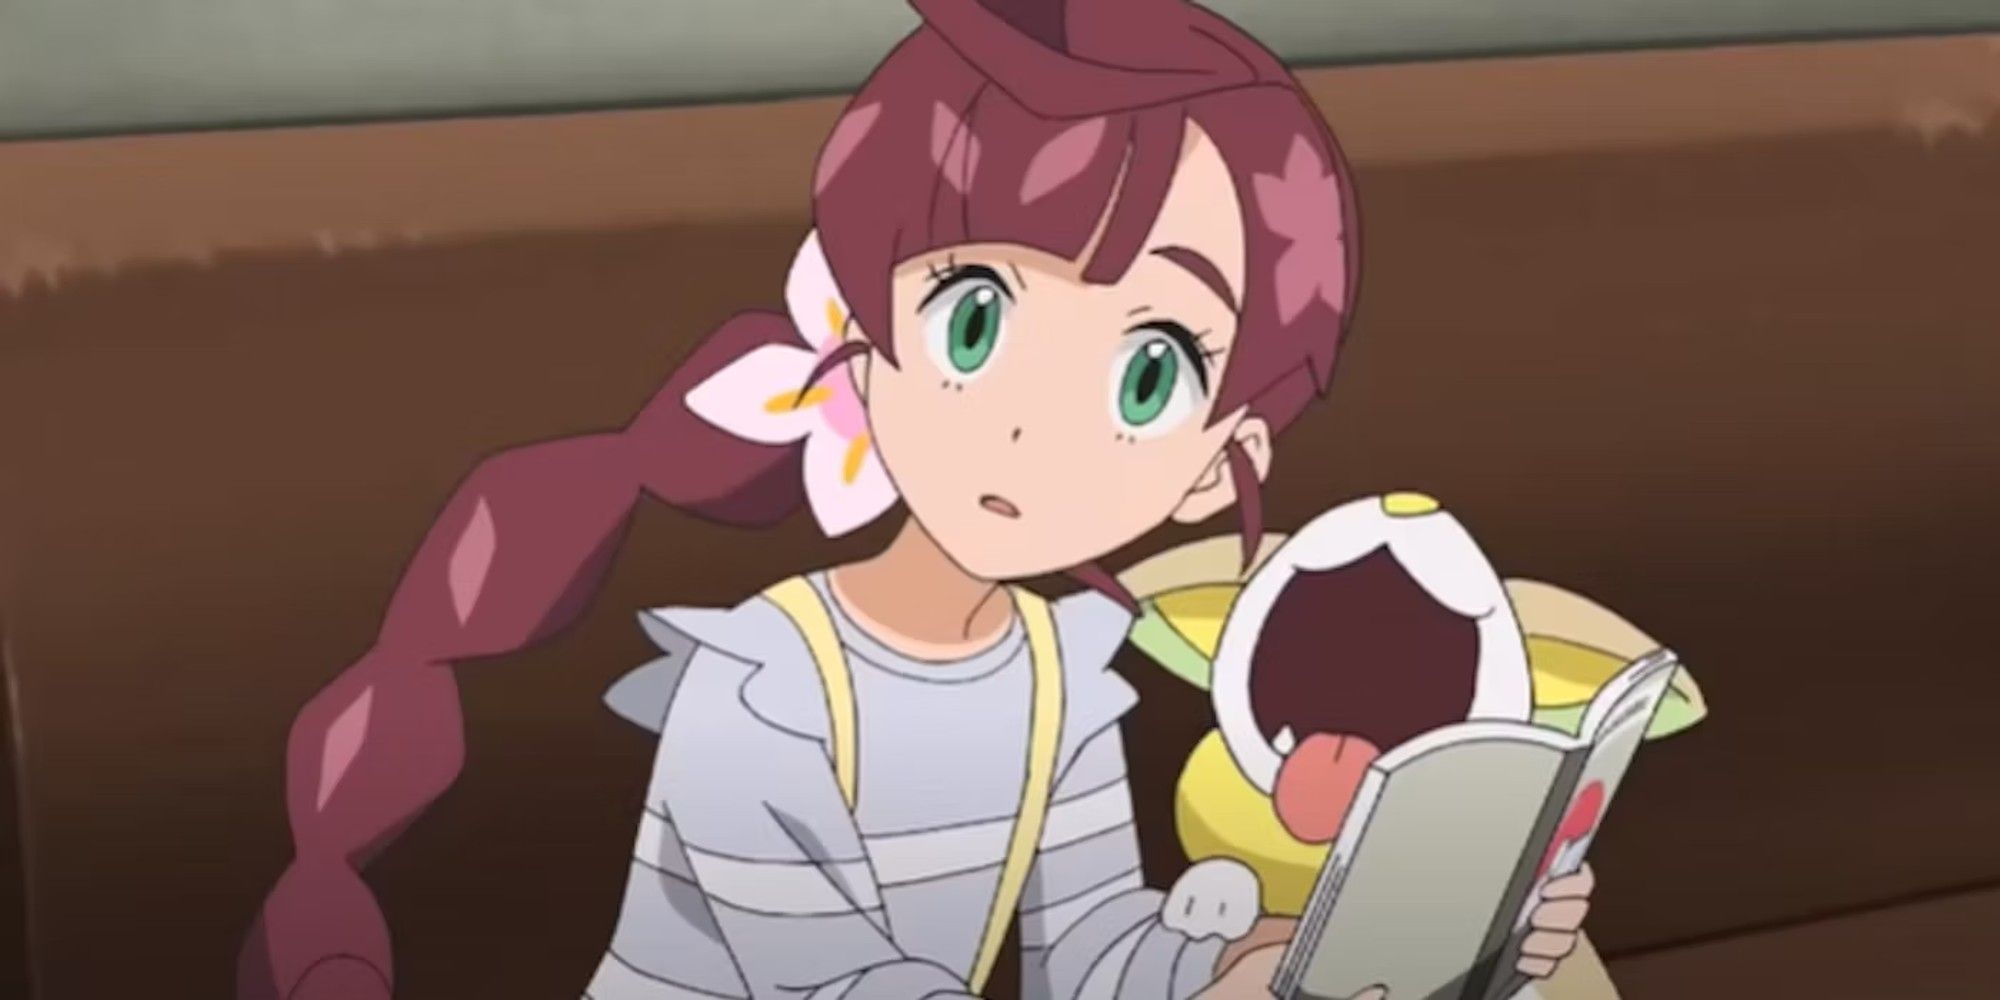 Chloe from the Pokemon Anime with her Yamper, reading a book